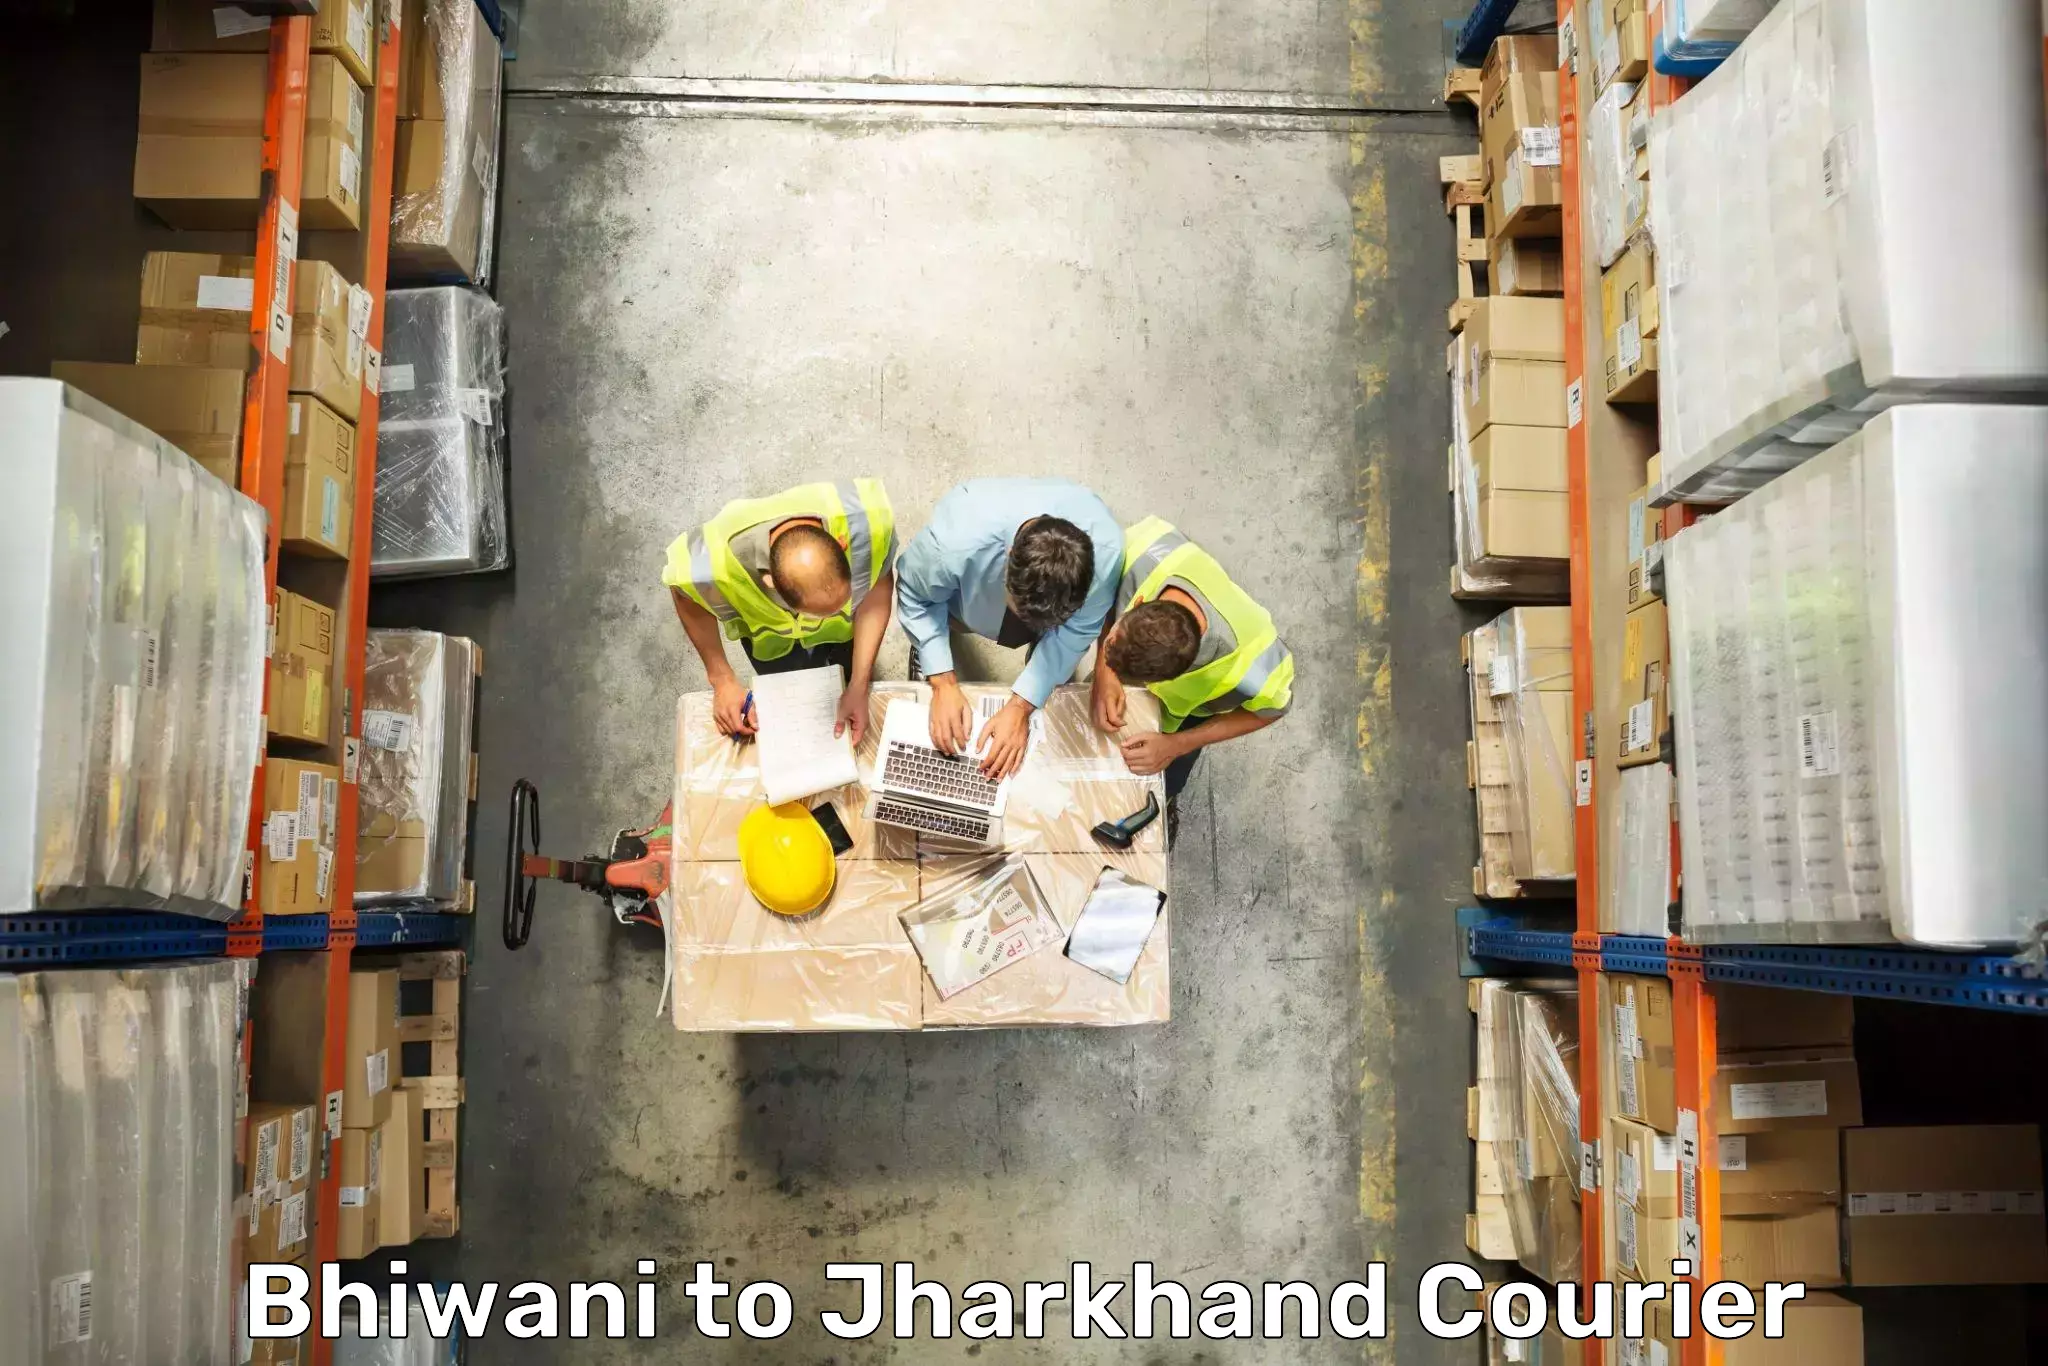 Luggage delivery network Bhiwani to Jharkhand